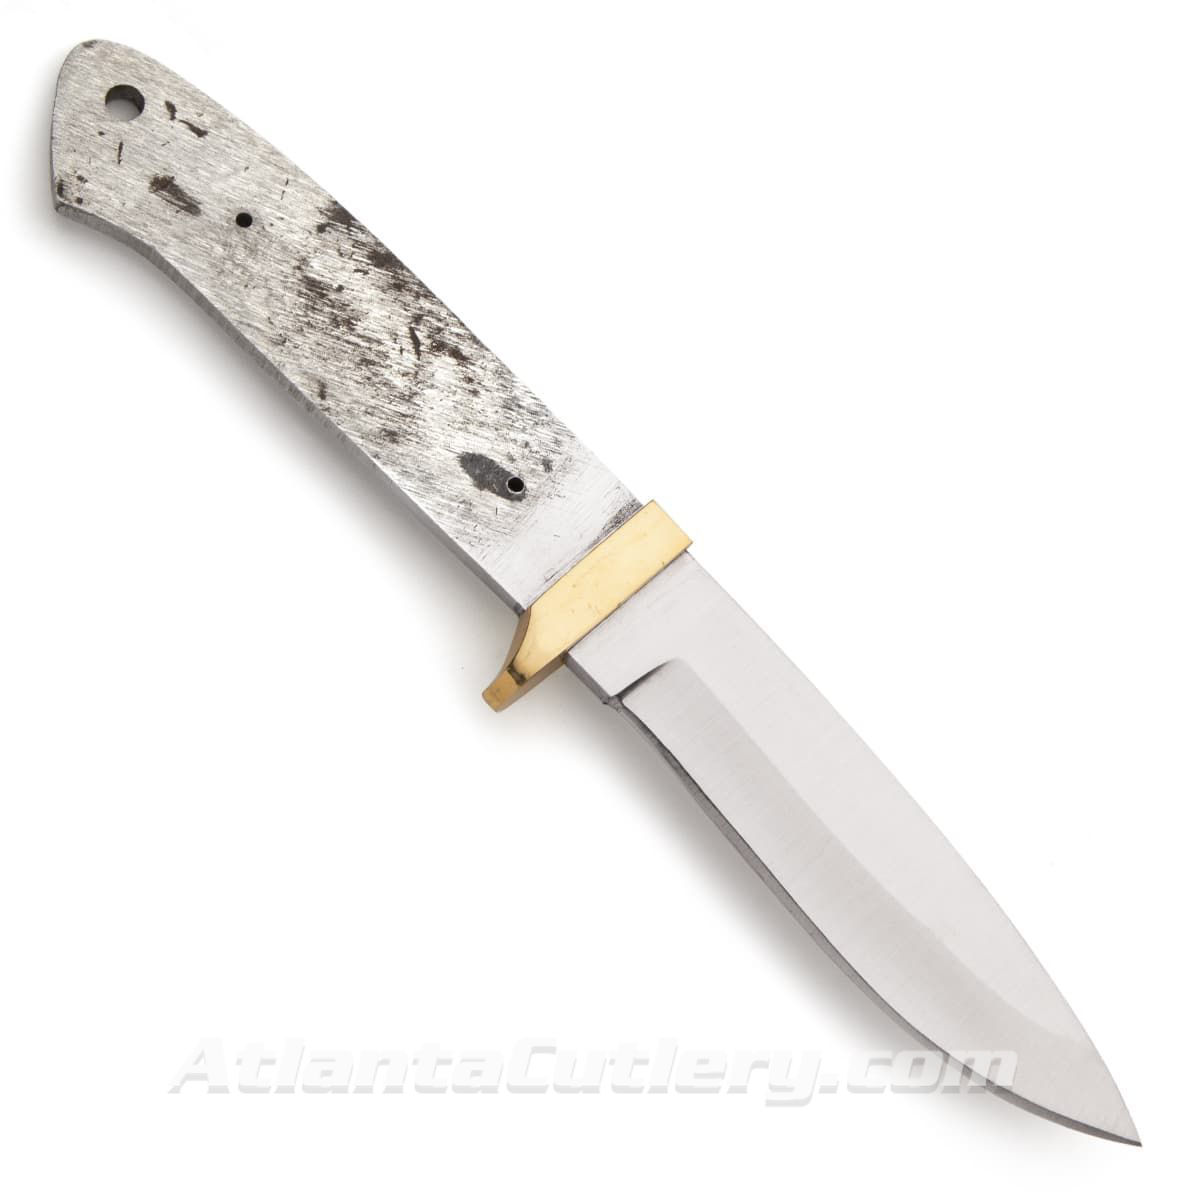 400 series stainless steel medium-length drop point blade with polished solid brass guard, pre-drilled full tang, sharp edge